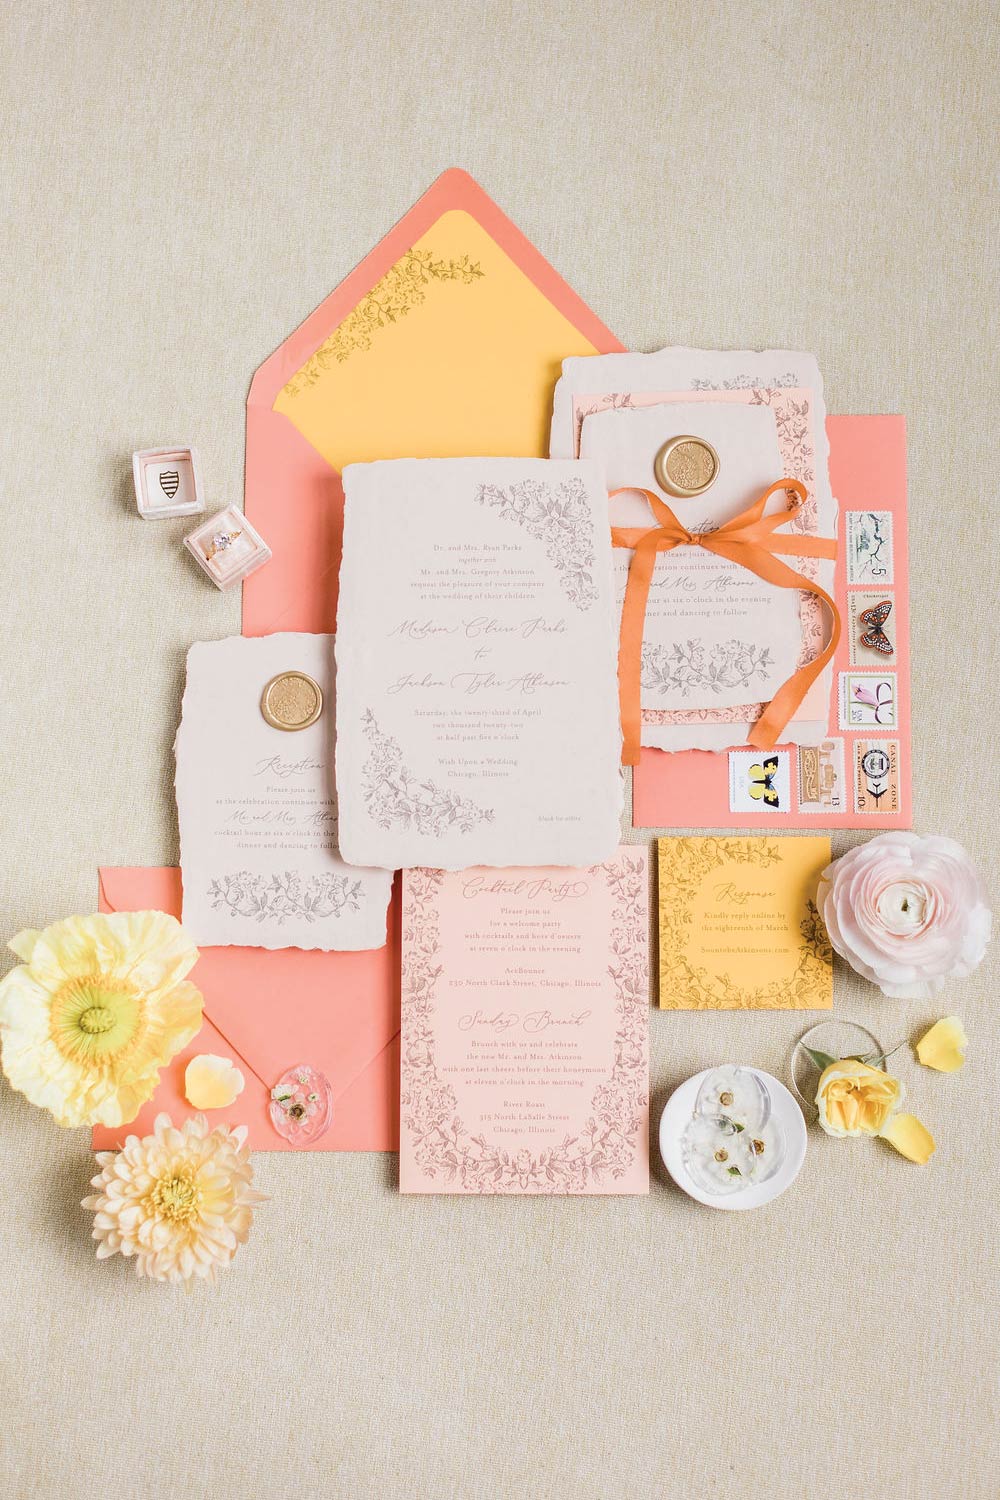 Handmade-paper-with-flower-illustrations-in-coral,-peach,-and-mustard-yellow-with-flower-wax-seal-and-ribbon